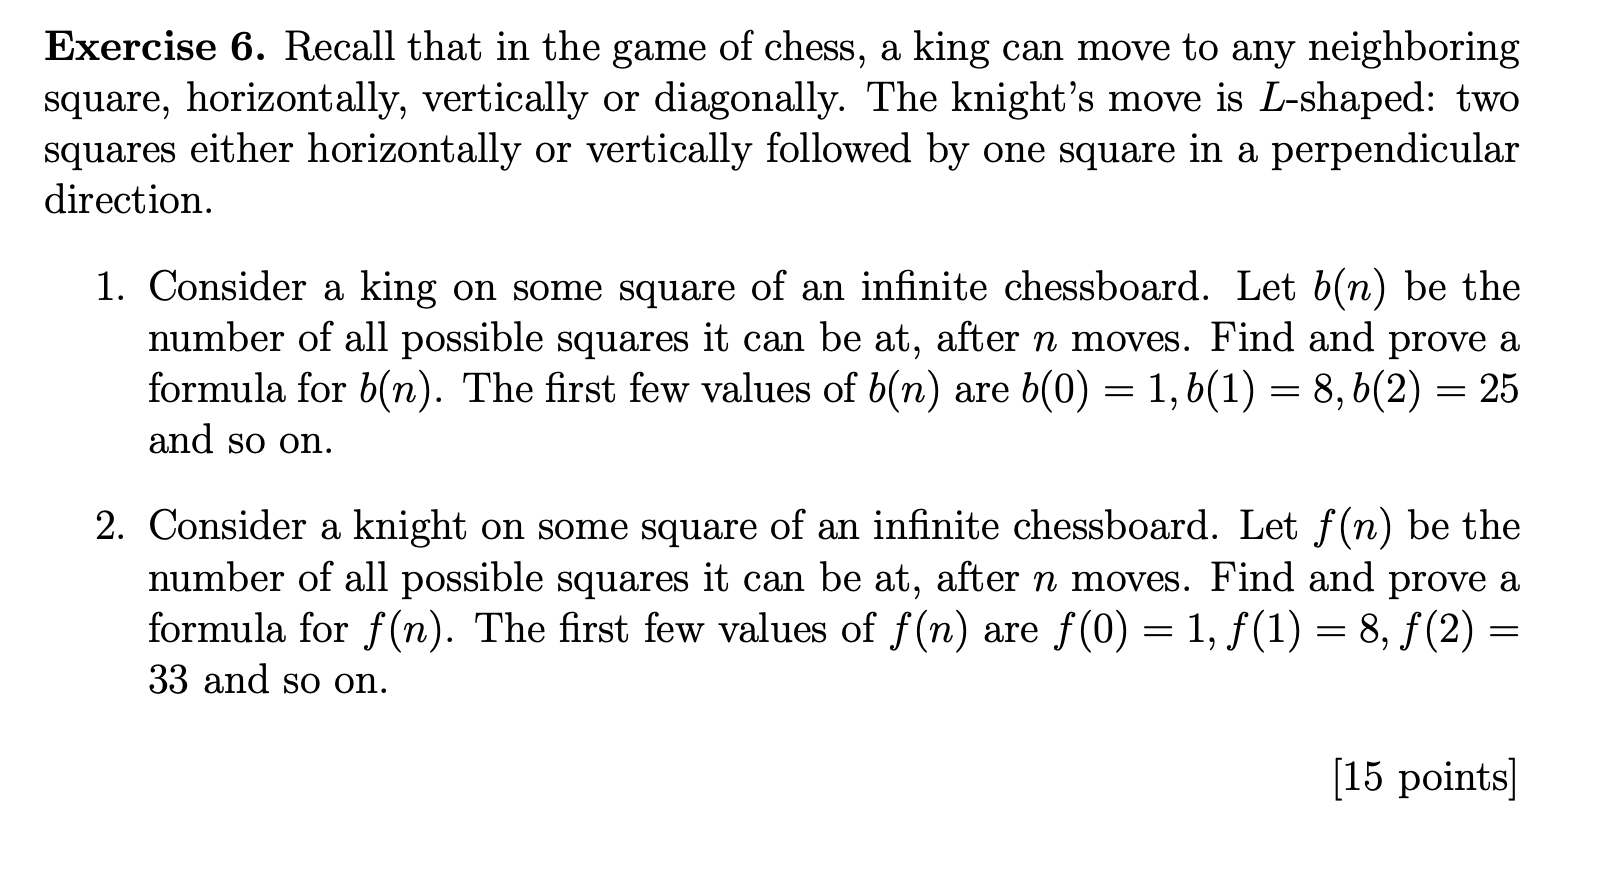 The Secrets Of The Universe - This value, known as the Shannon Number  represents all of the possible move variations in the game of chess. It is  estimated to be between 10¹¹¹